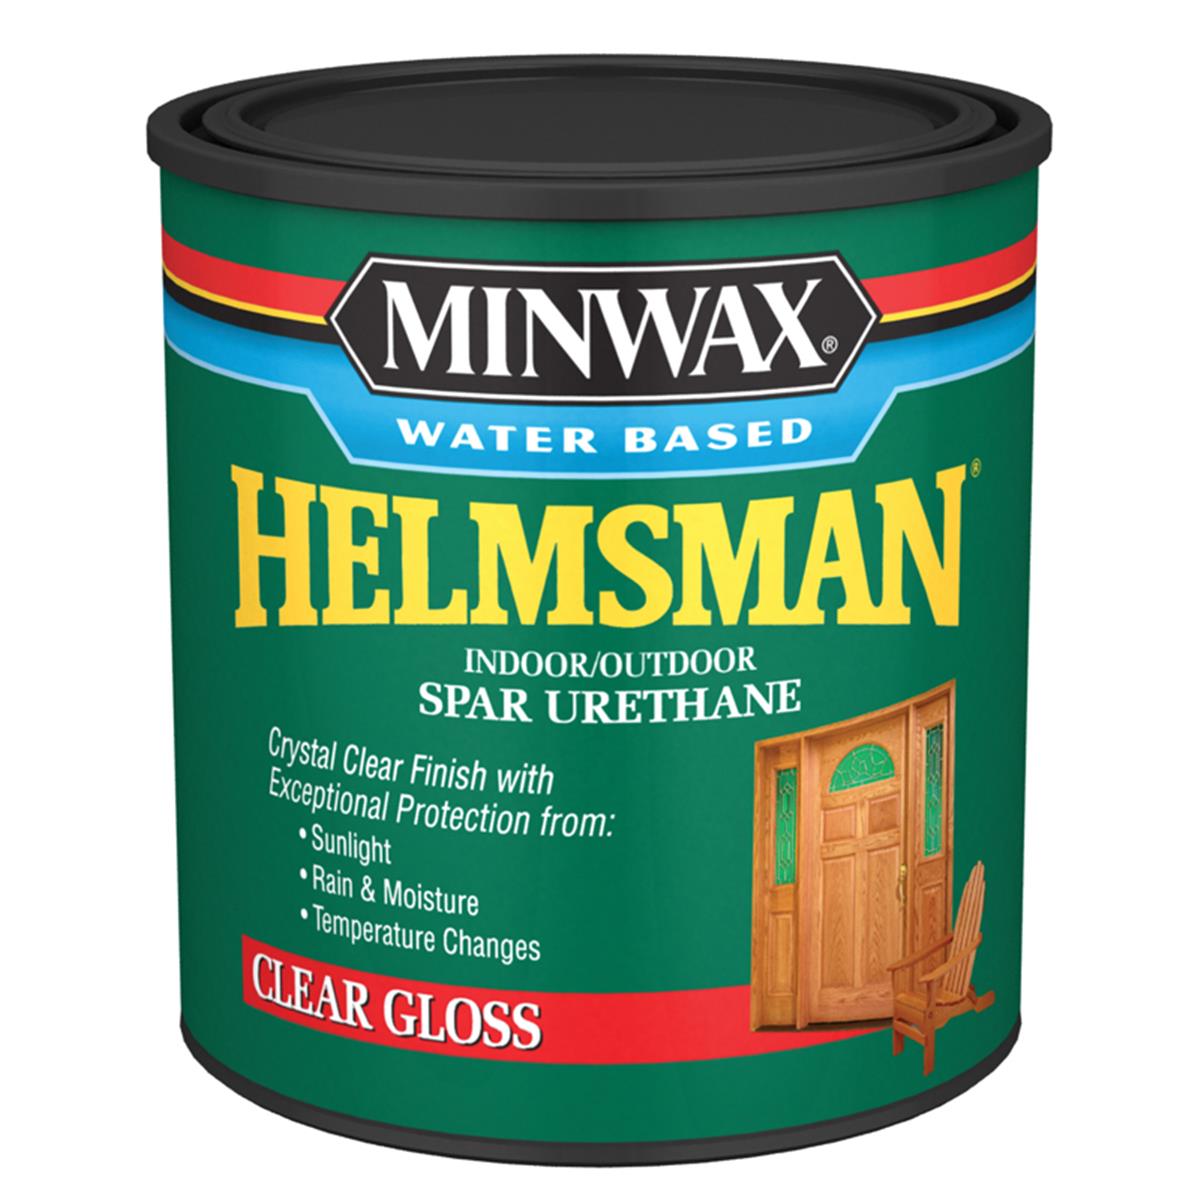 Picture of Minwax 1372952 1 qt. Helmsman Water-based Gloss Urethane